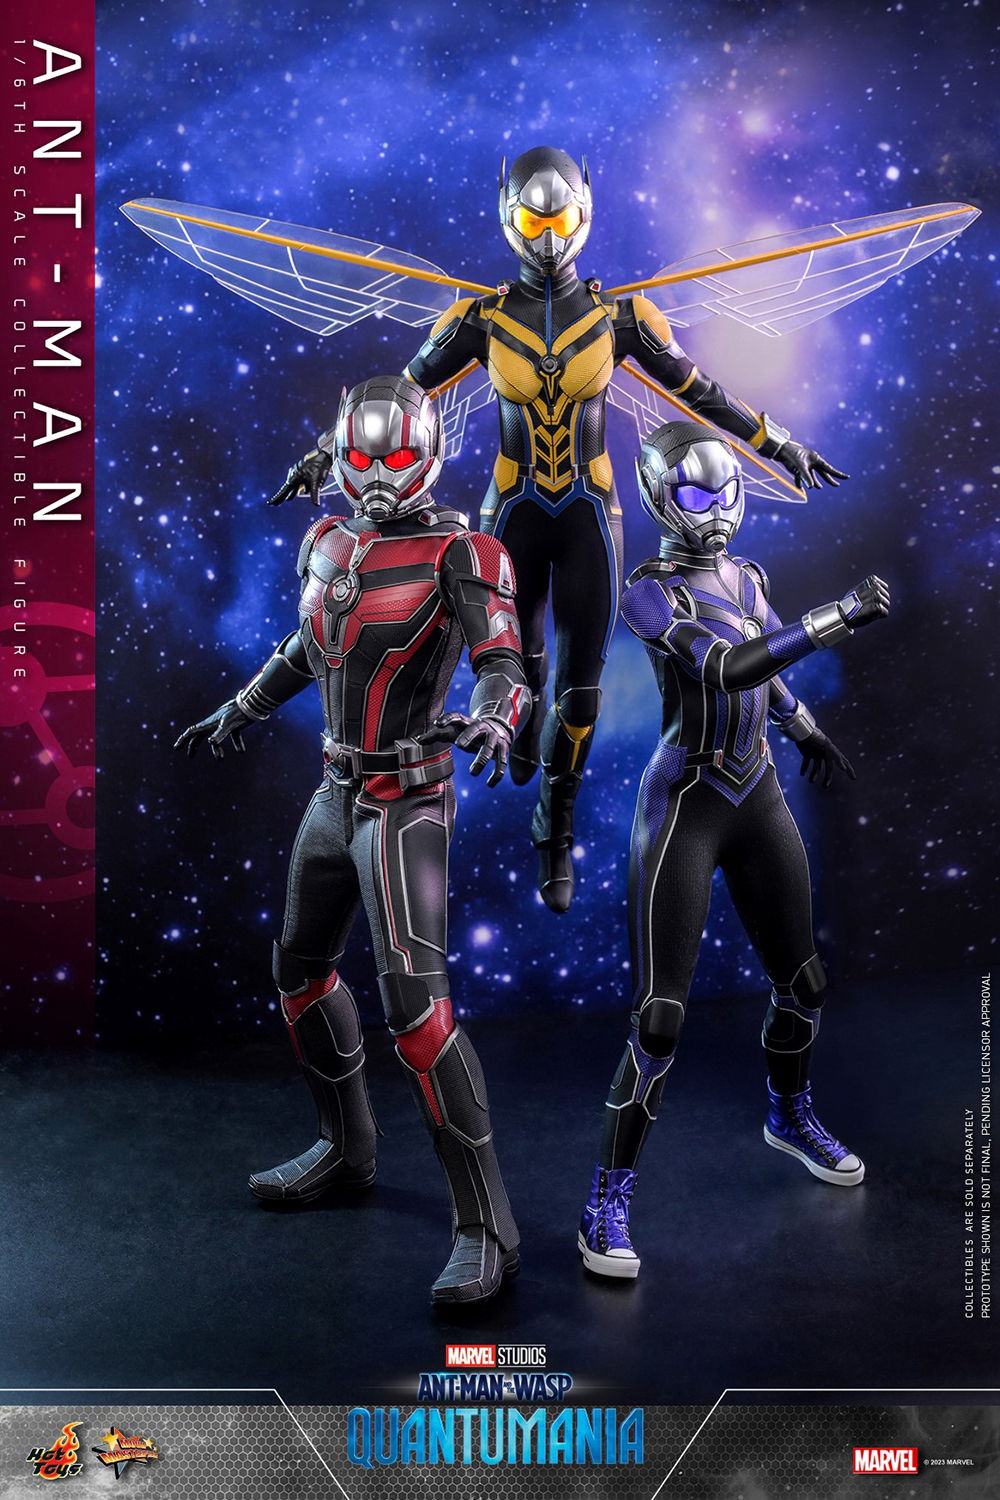 Marvel: Ant-Man and the Wasp Quantumania - Kang 1:6 Scale Figure